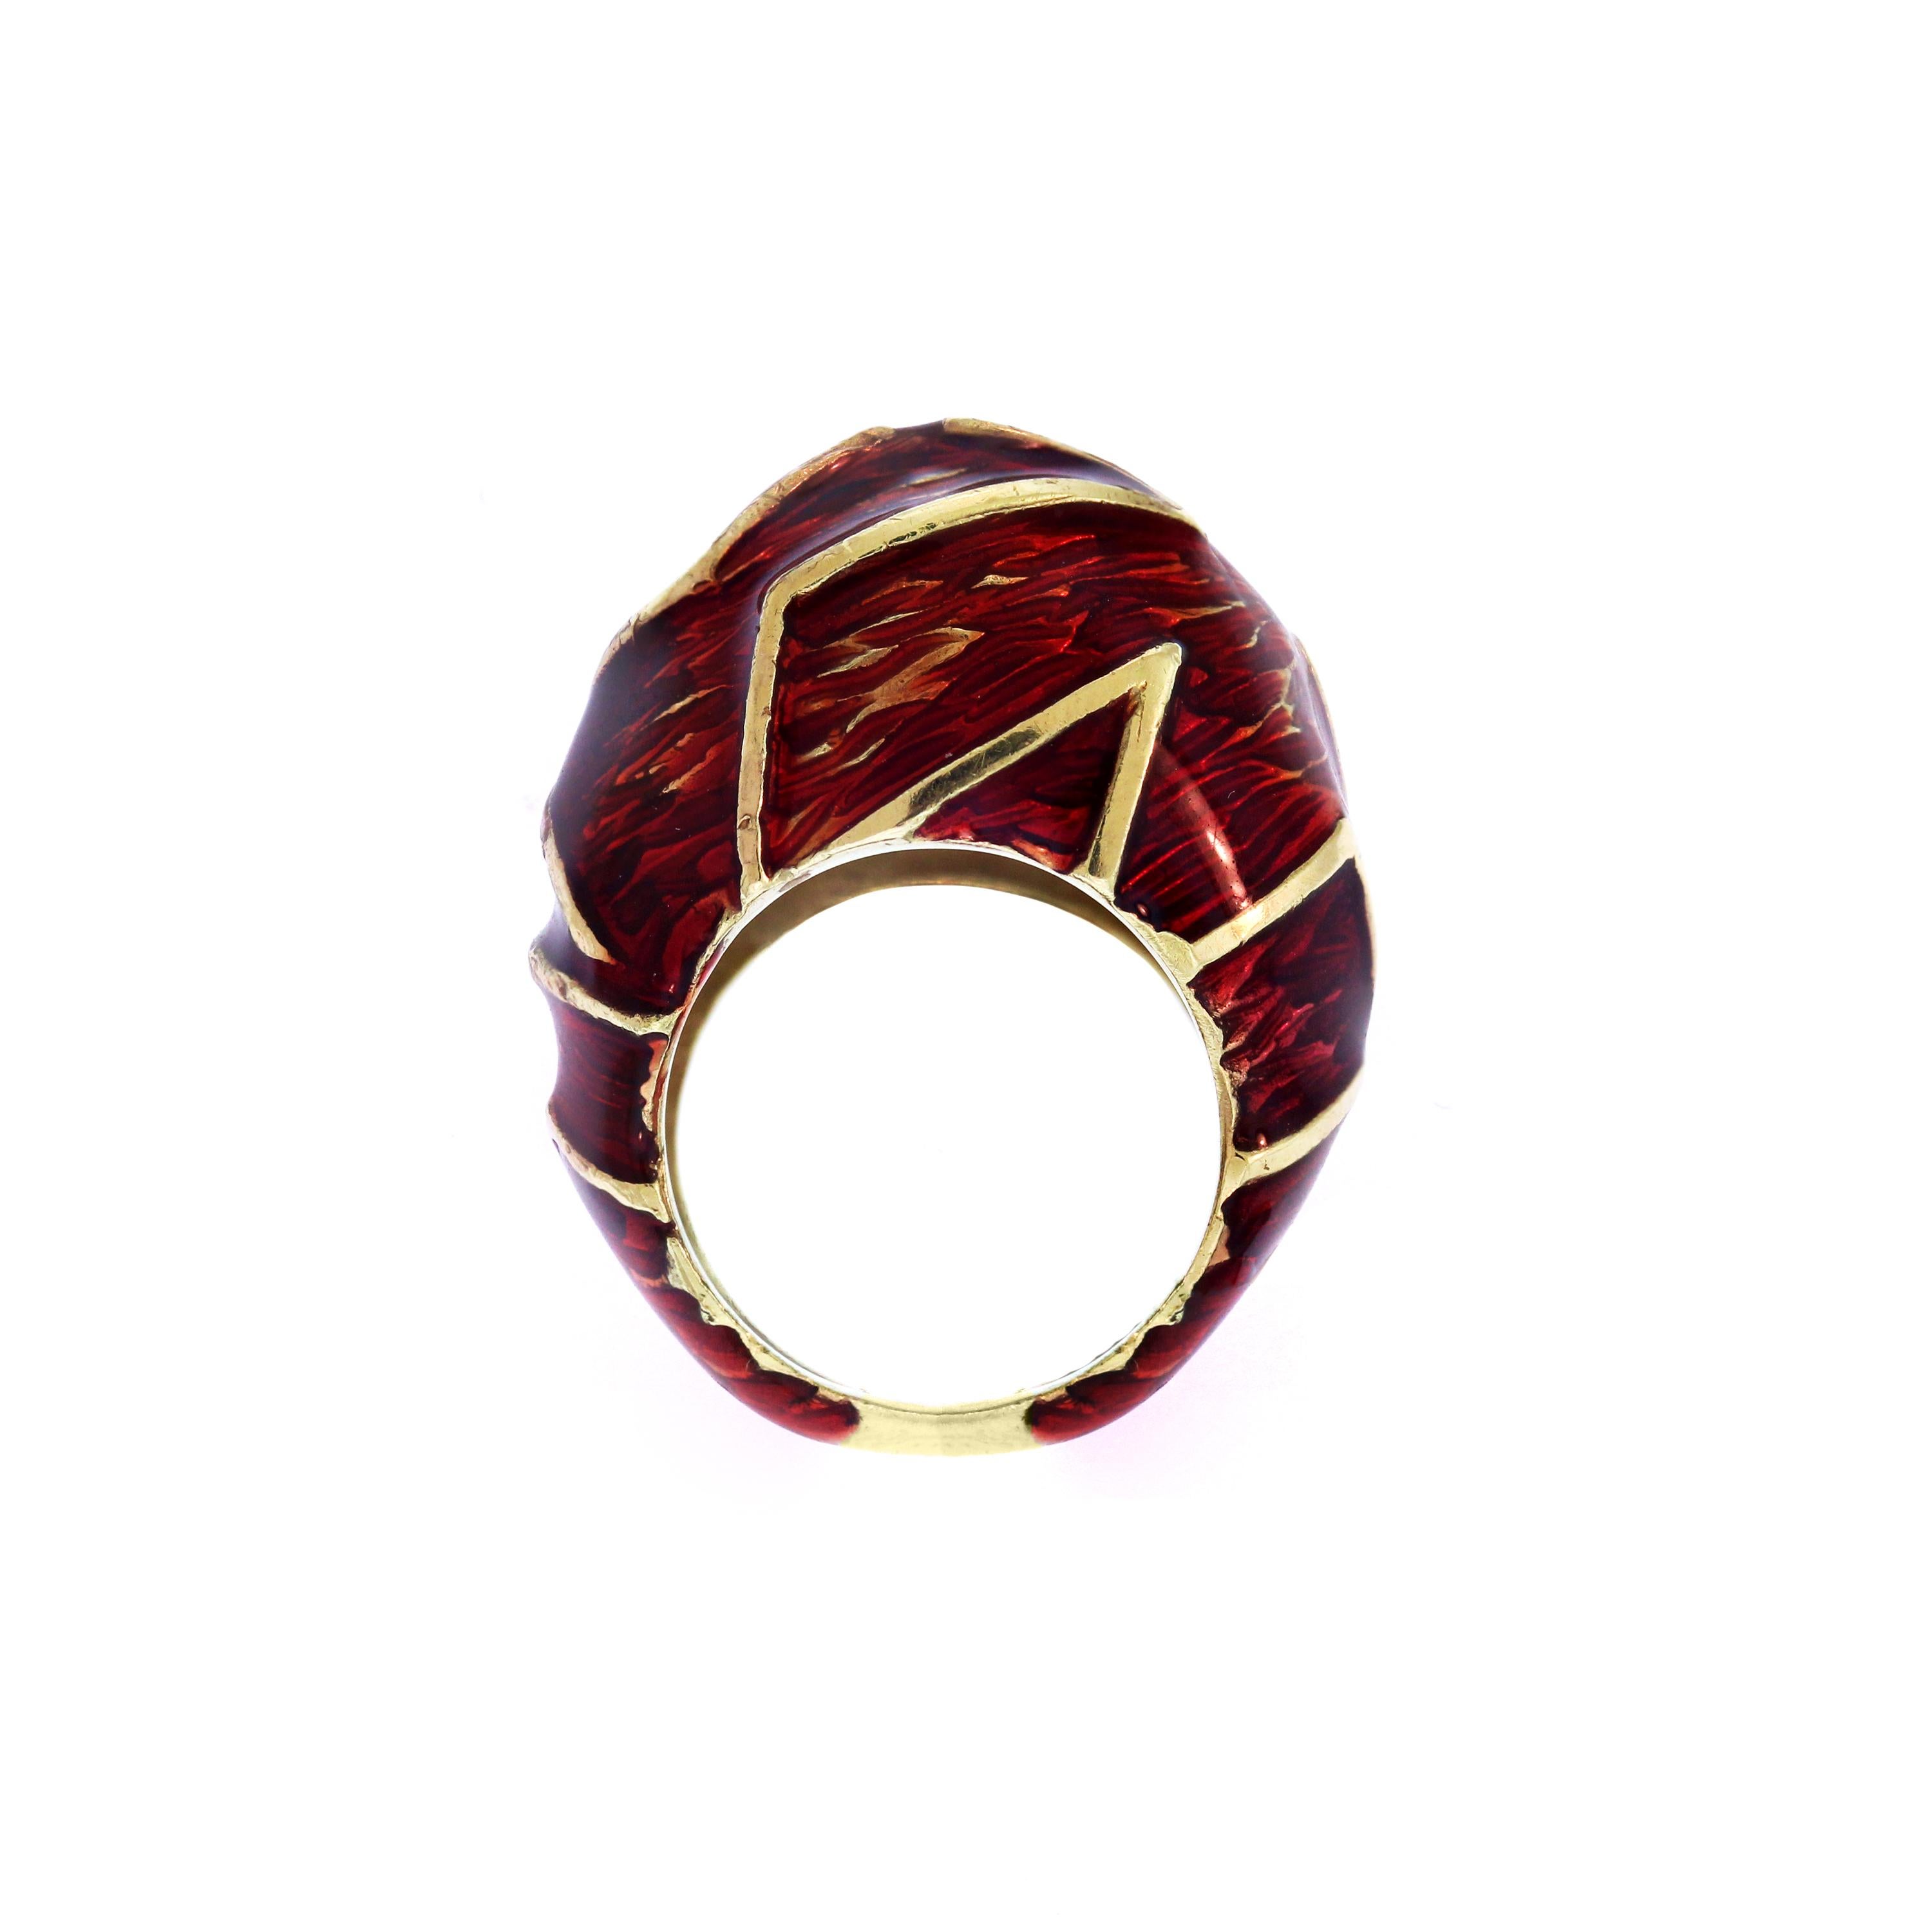 IF YOU ARE REALLY INTERESTED, CONTACT US WITH ANY REASONABLE OFFER. WE WILL TRY OUR BEST TO MAKE YOU HAPPY!

18K Yellow Gold Cocktail Ring with Red Enamel

Beautifully done Red Enamel all throughout the ring with beautiful texture

Ring face is 0.7